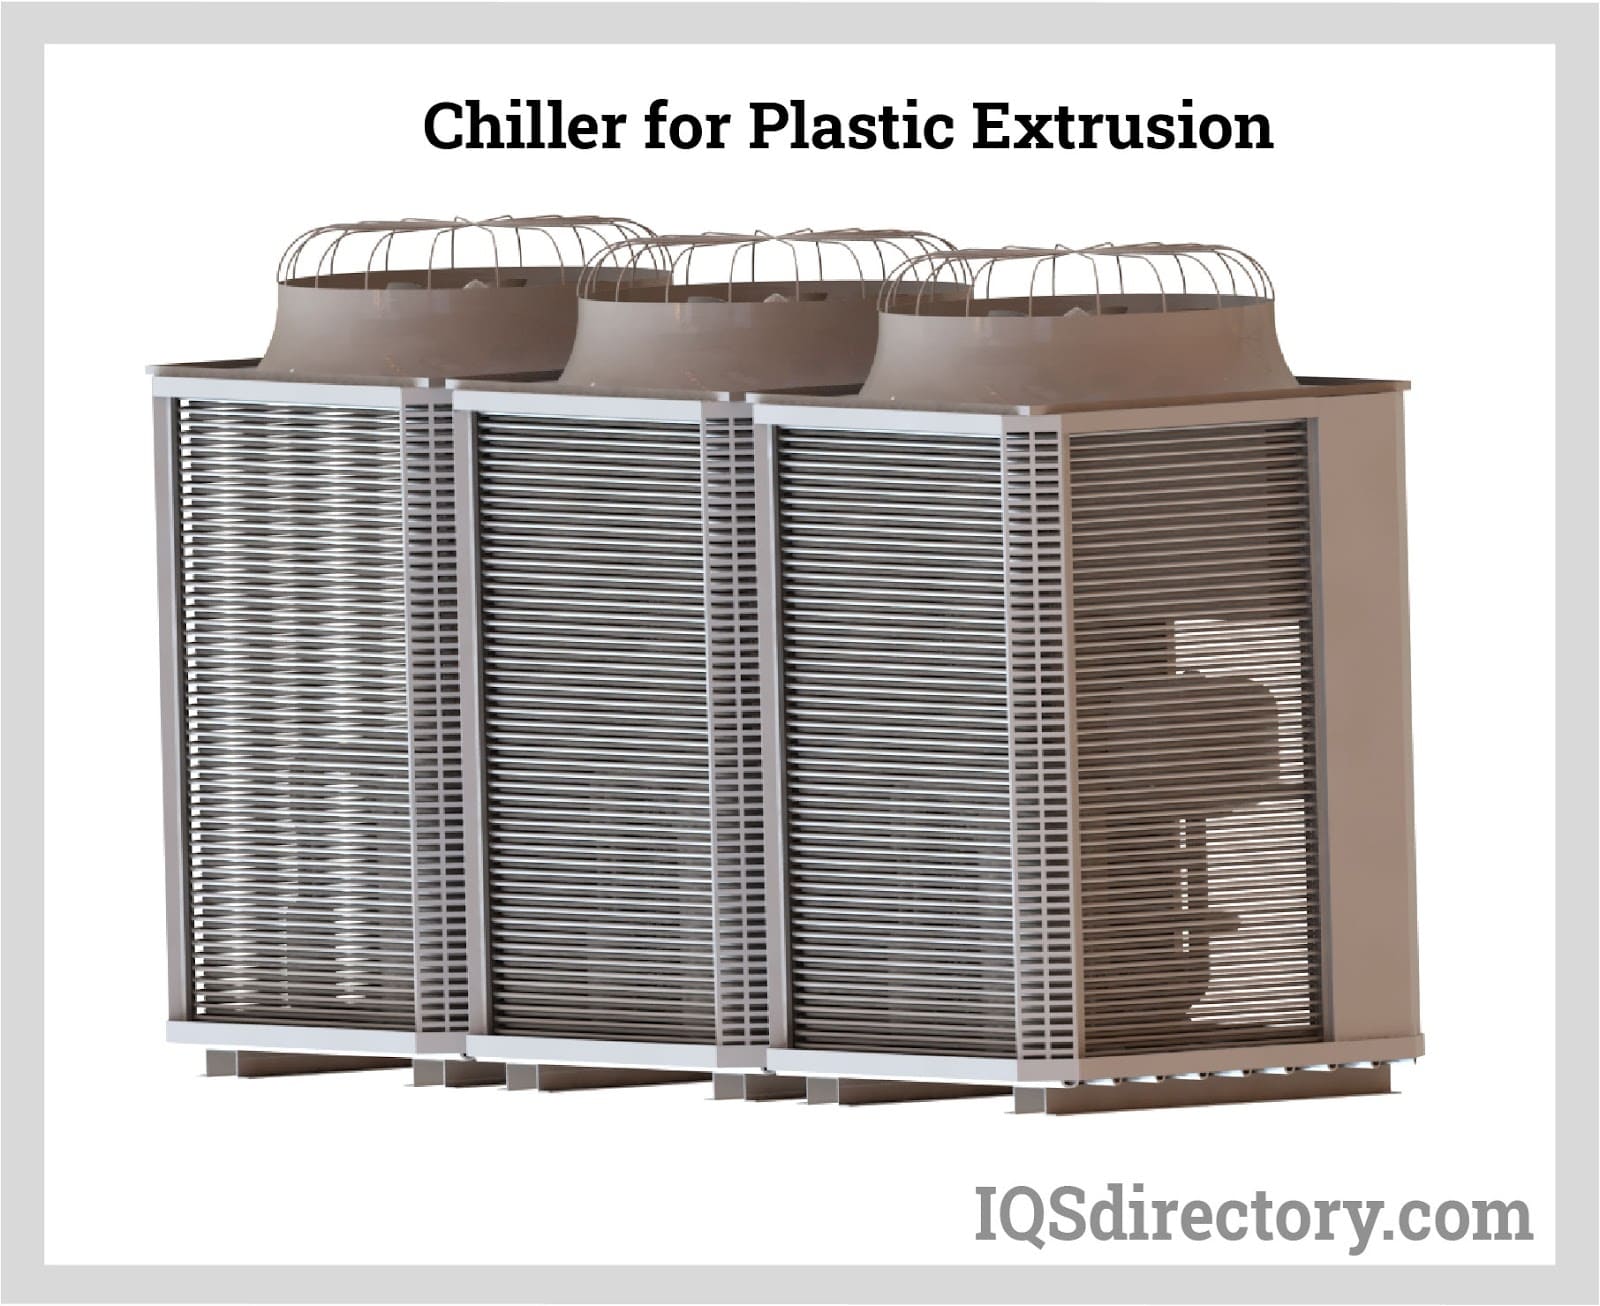 Chiller for Plastic Extrusion